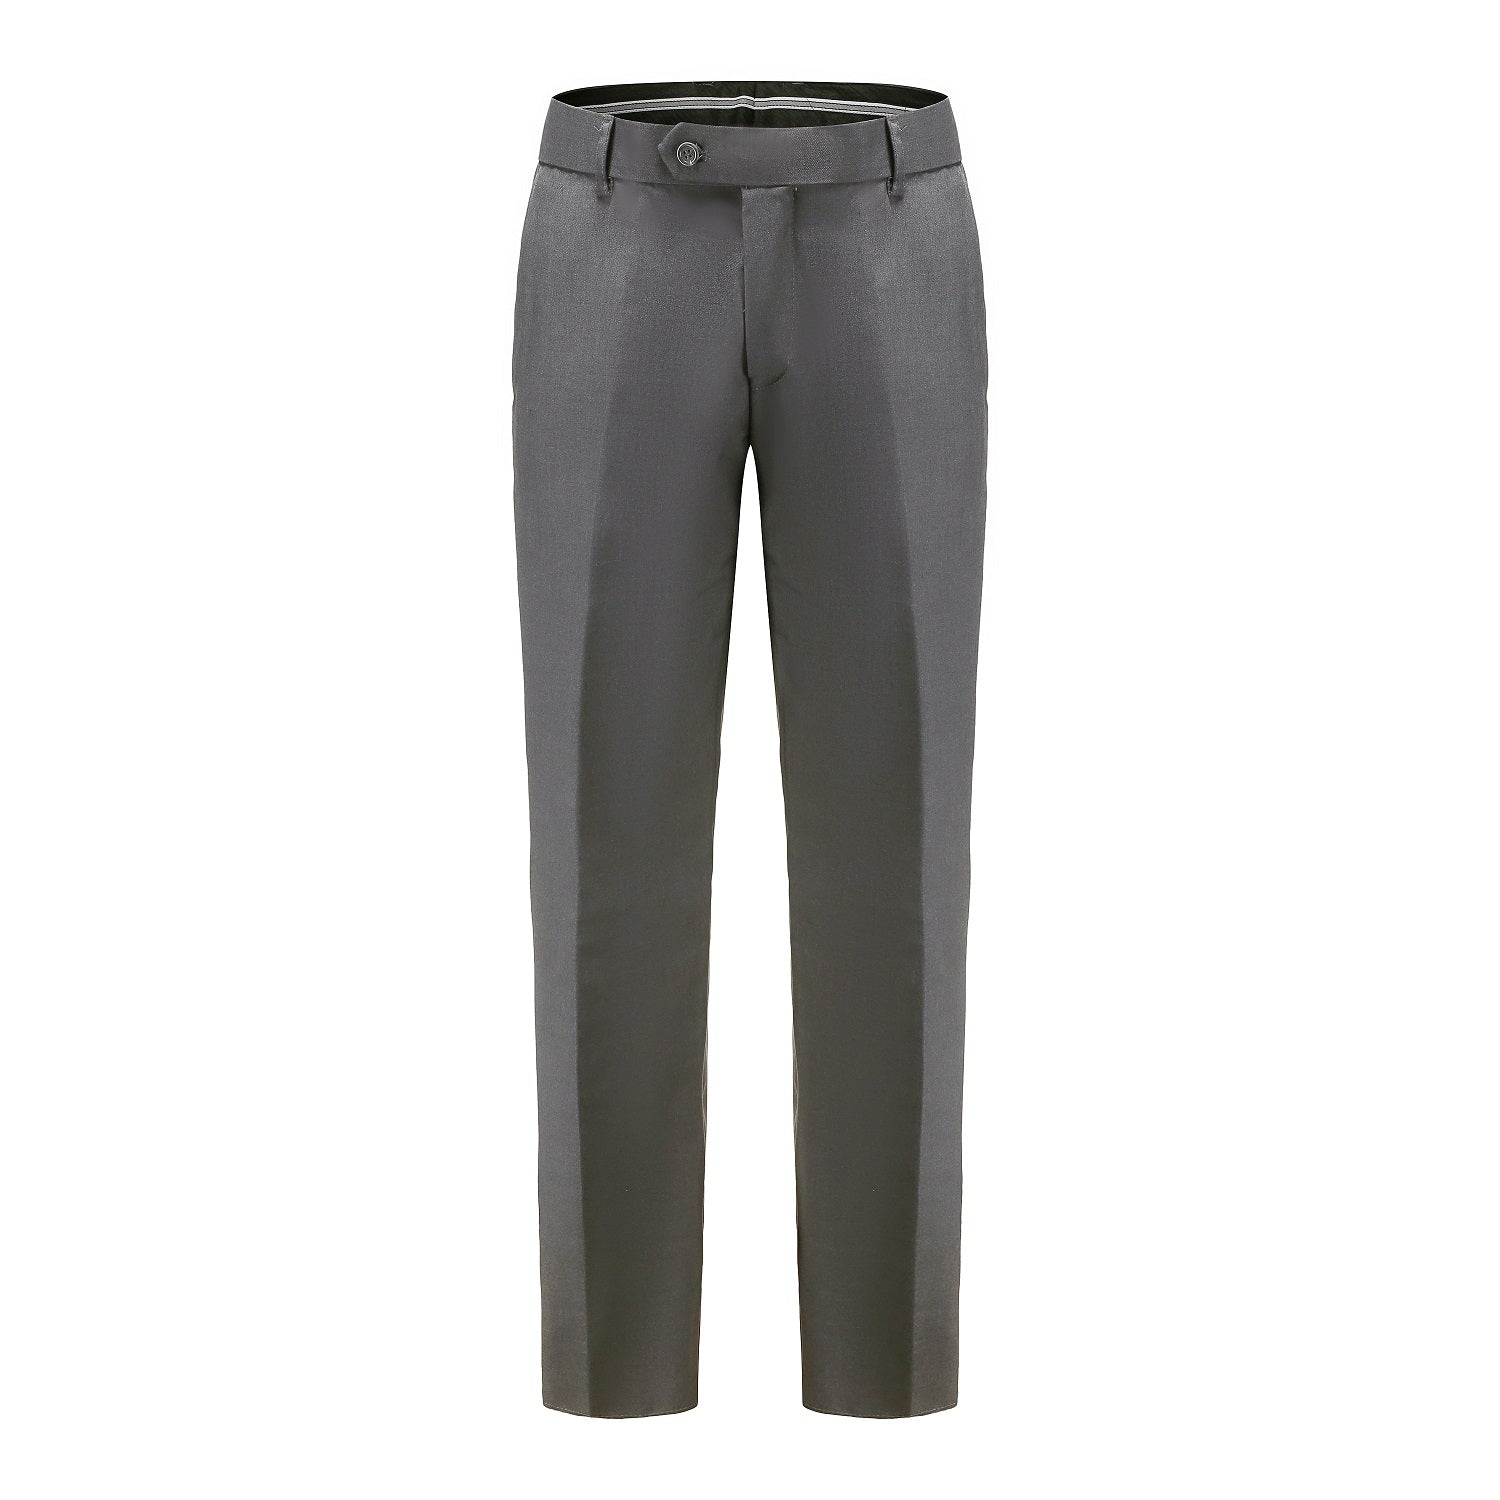 DB200 (SOLID) - CHARCOAL